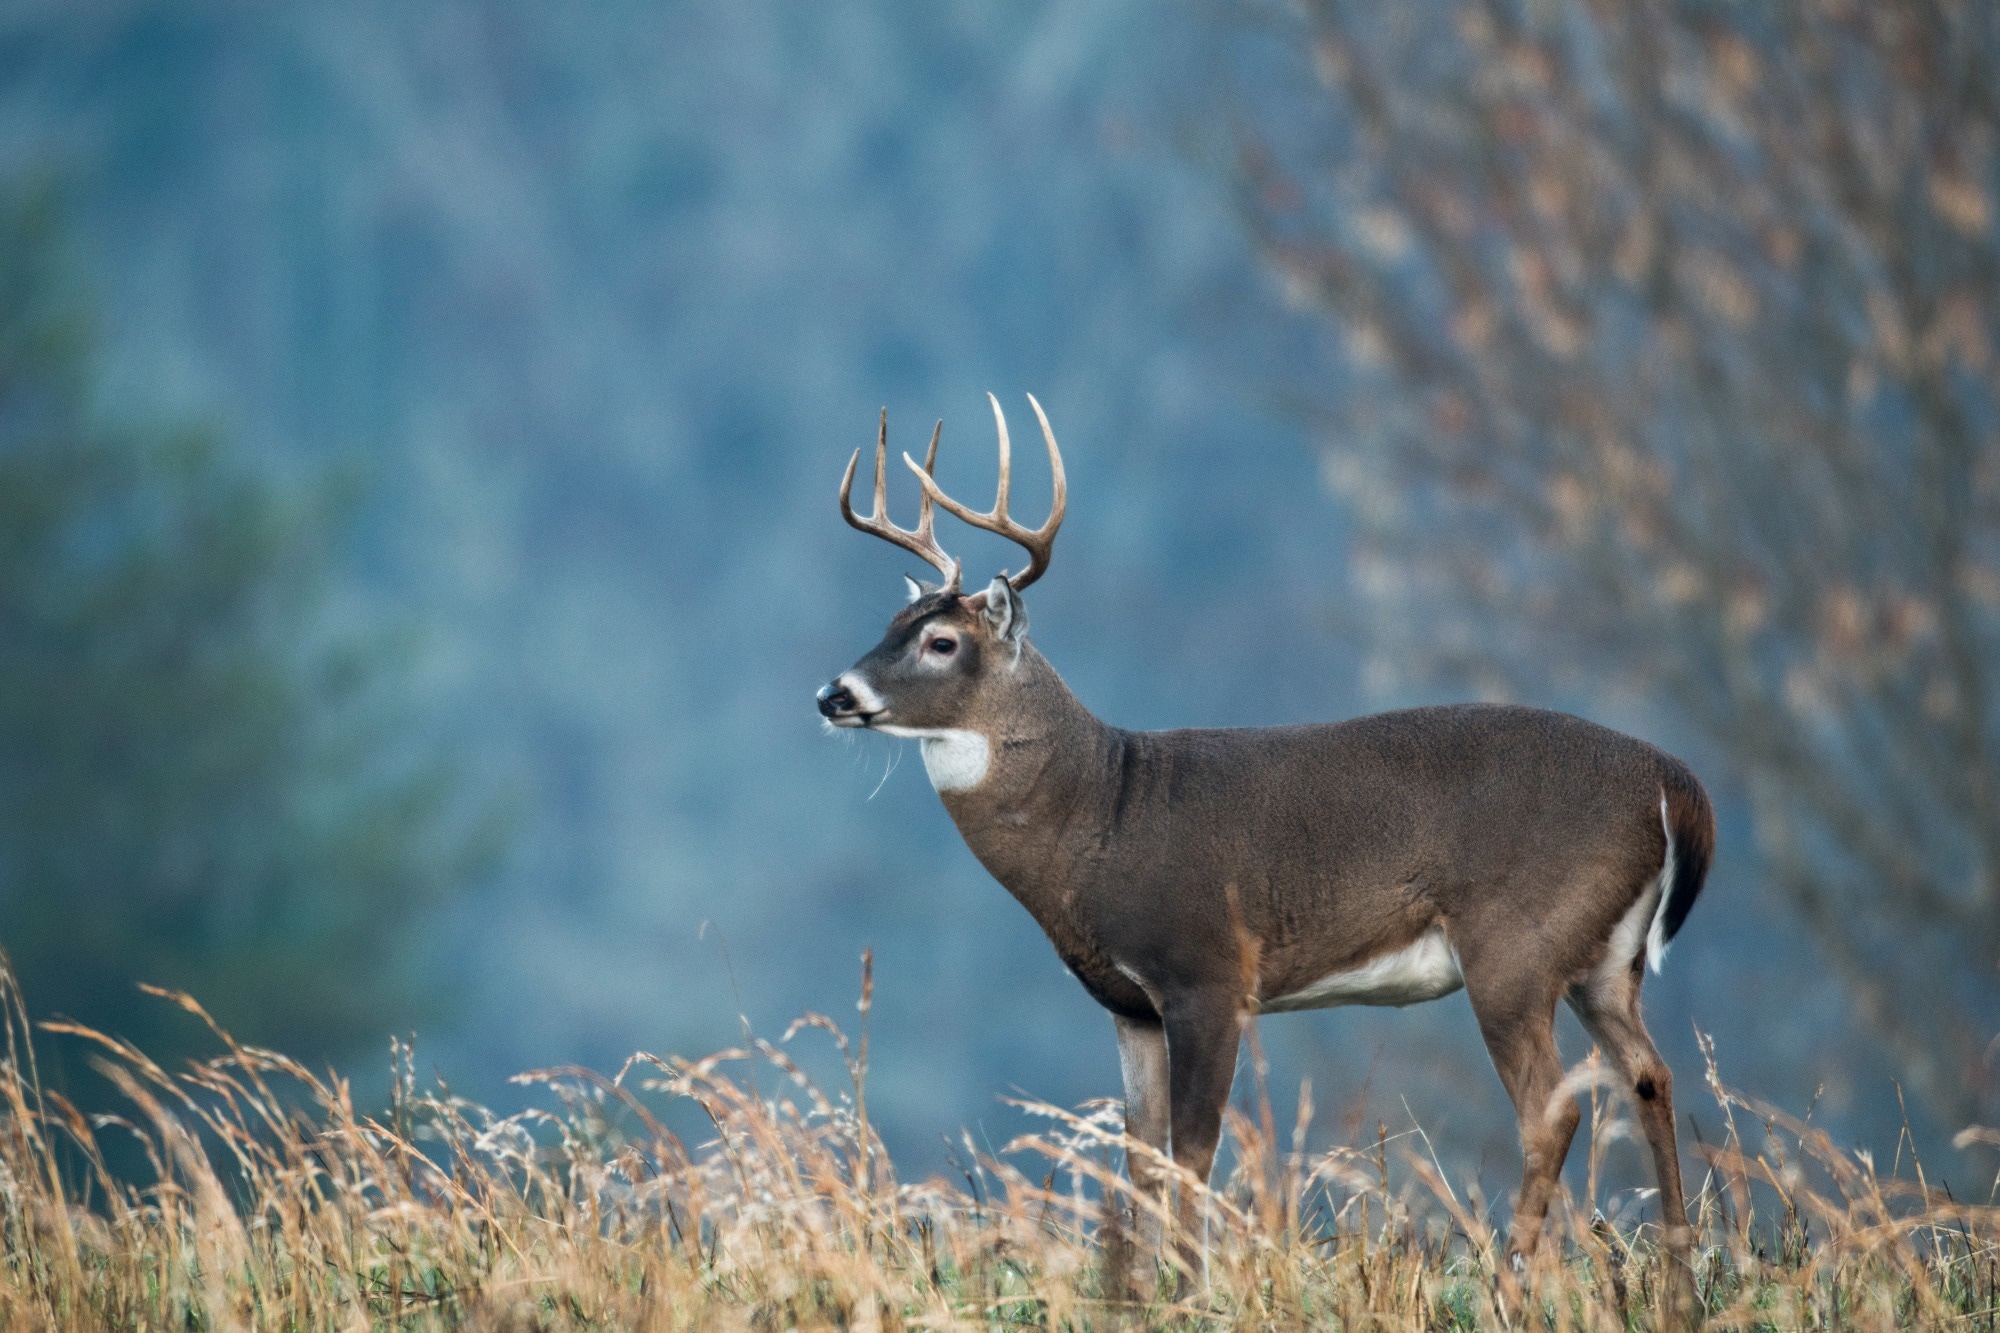 White-tailed deer buck. Image Credit: Tony Campbell / Shutterstock